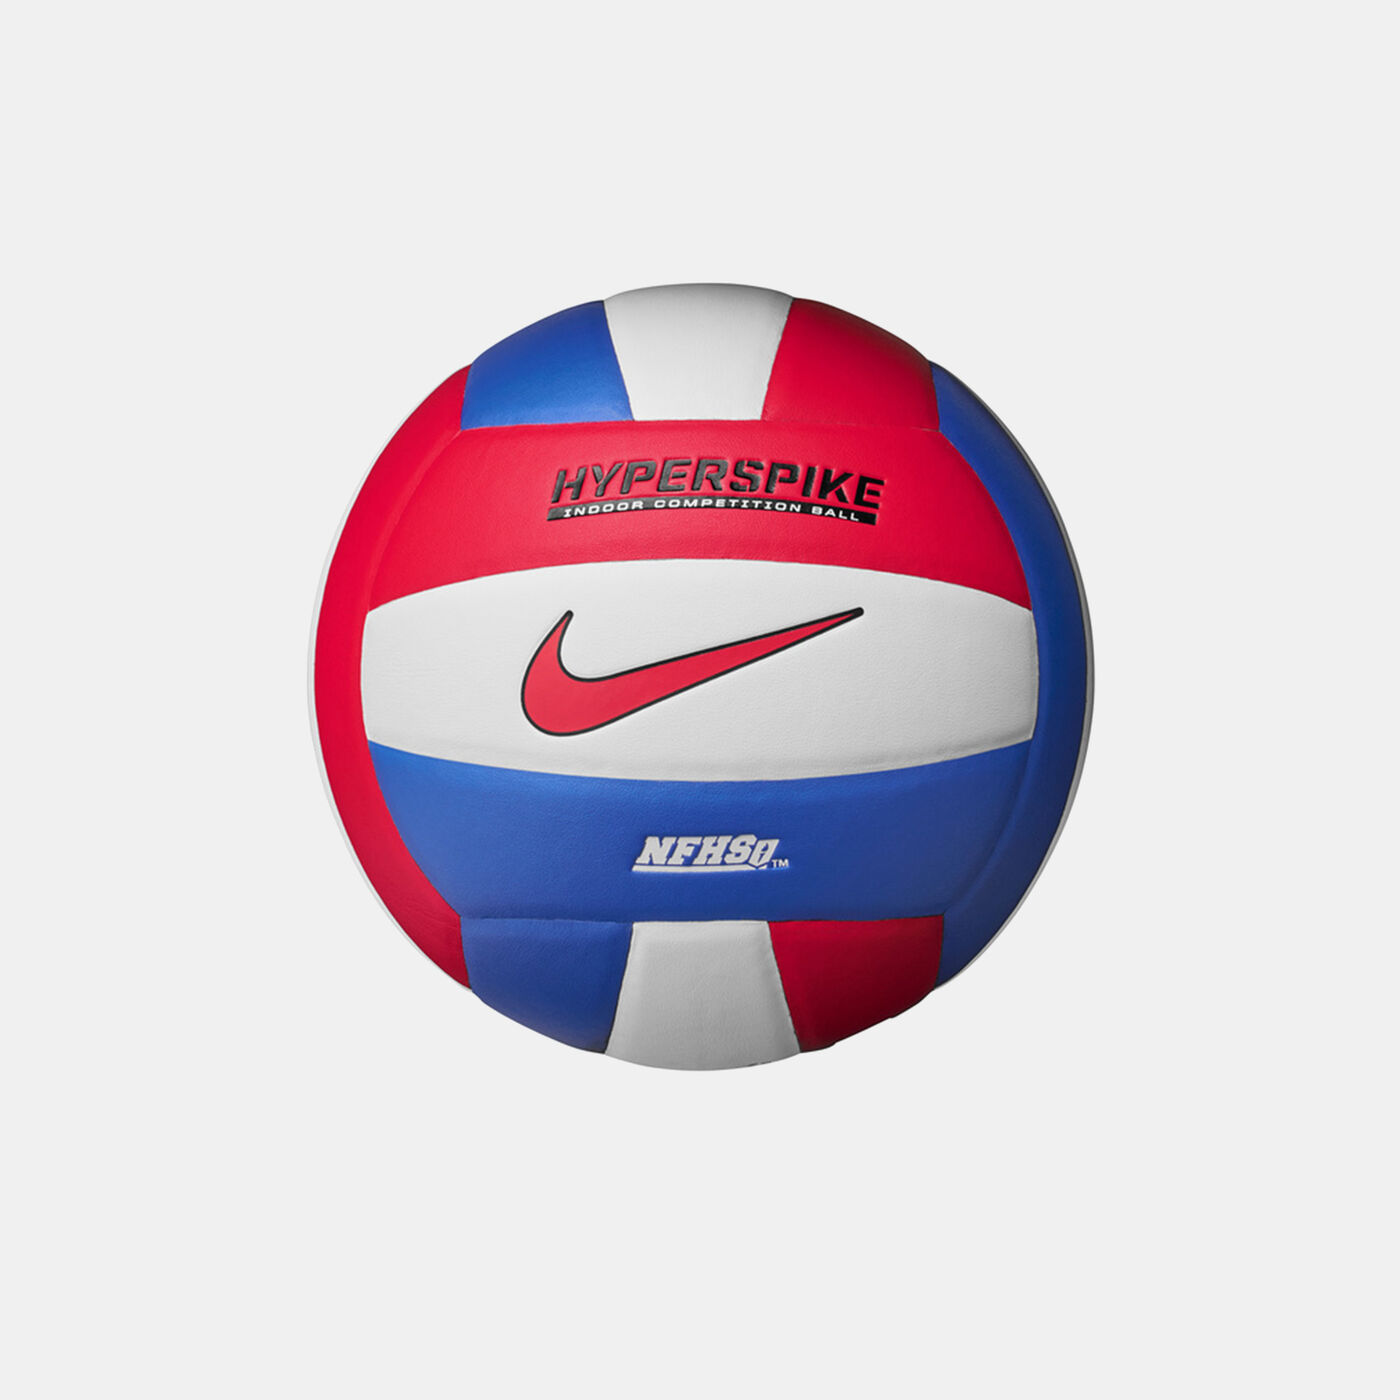 HyperSpike 18P Volleyball (Size 5)